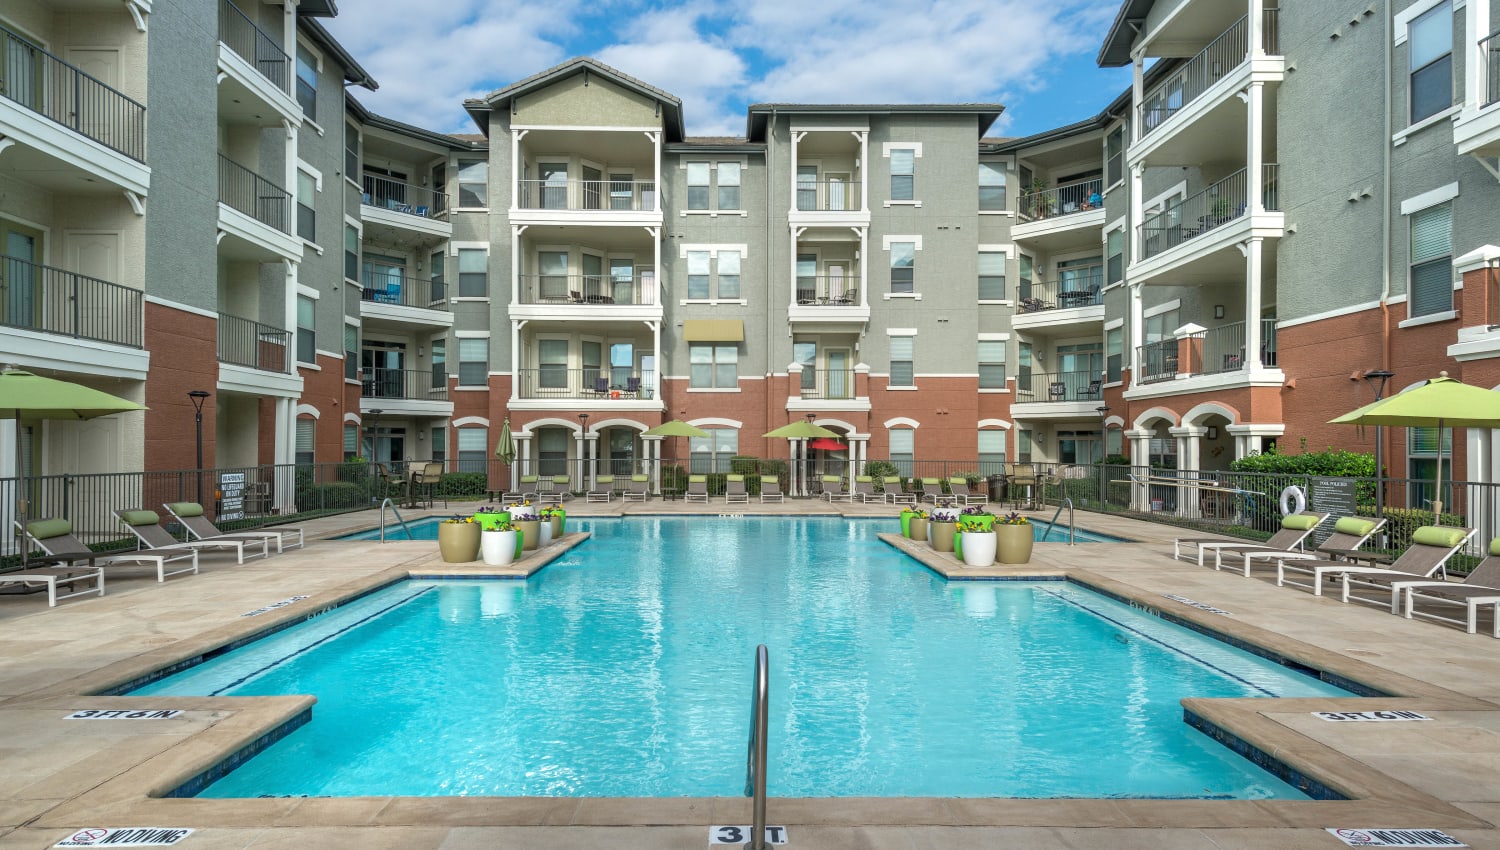 Inviting pool on a peaceful day at Olympus Las Colinas in Irving, Texas